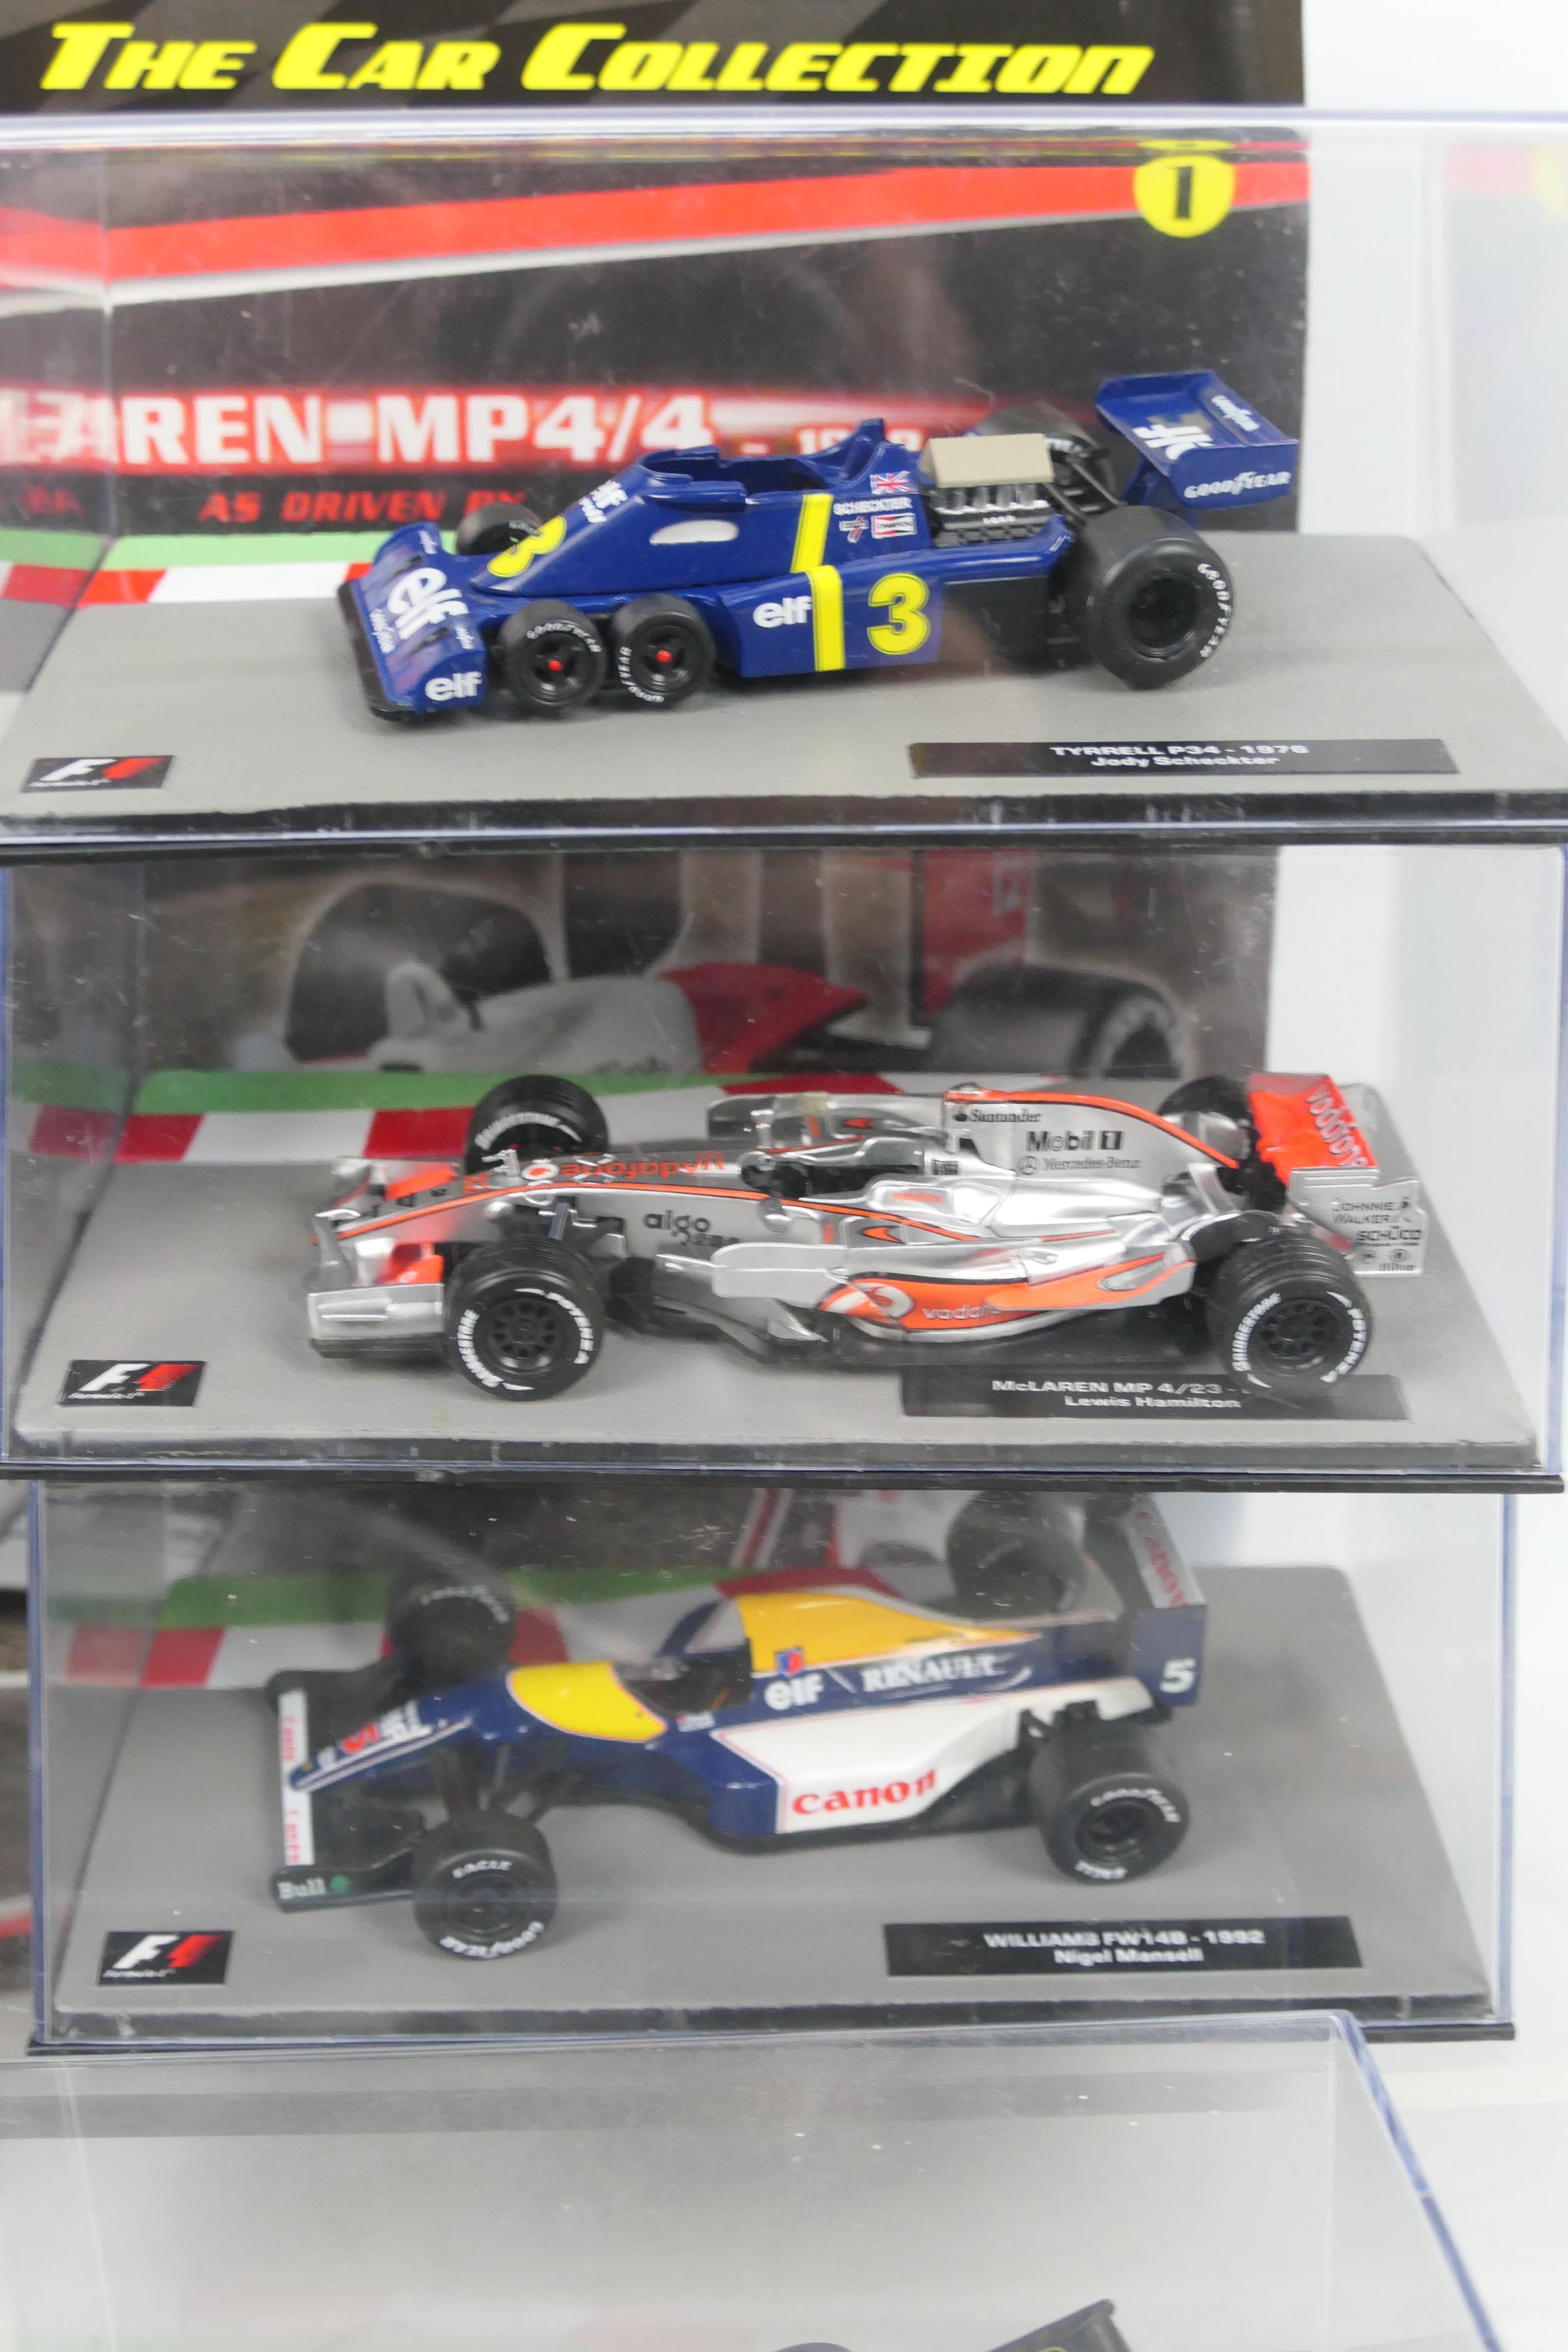 Panini F1 Car Collection - Corgi - Minichamps - A collection of 18 Formula One cars in 1:43 scale - Image 5 of 5